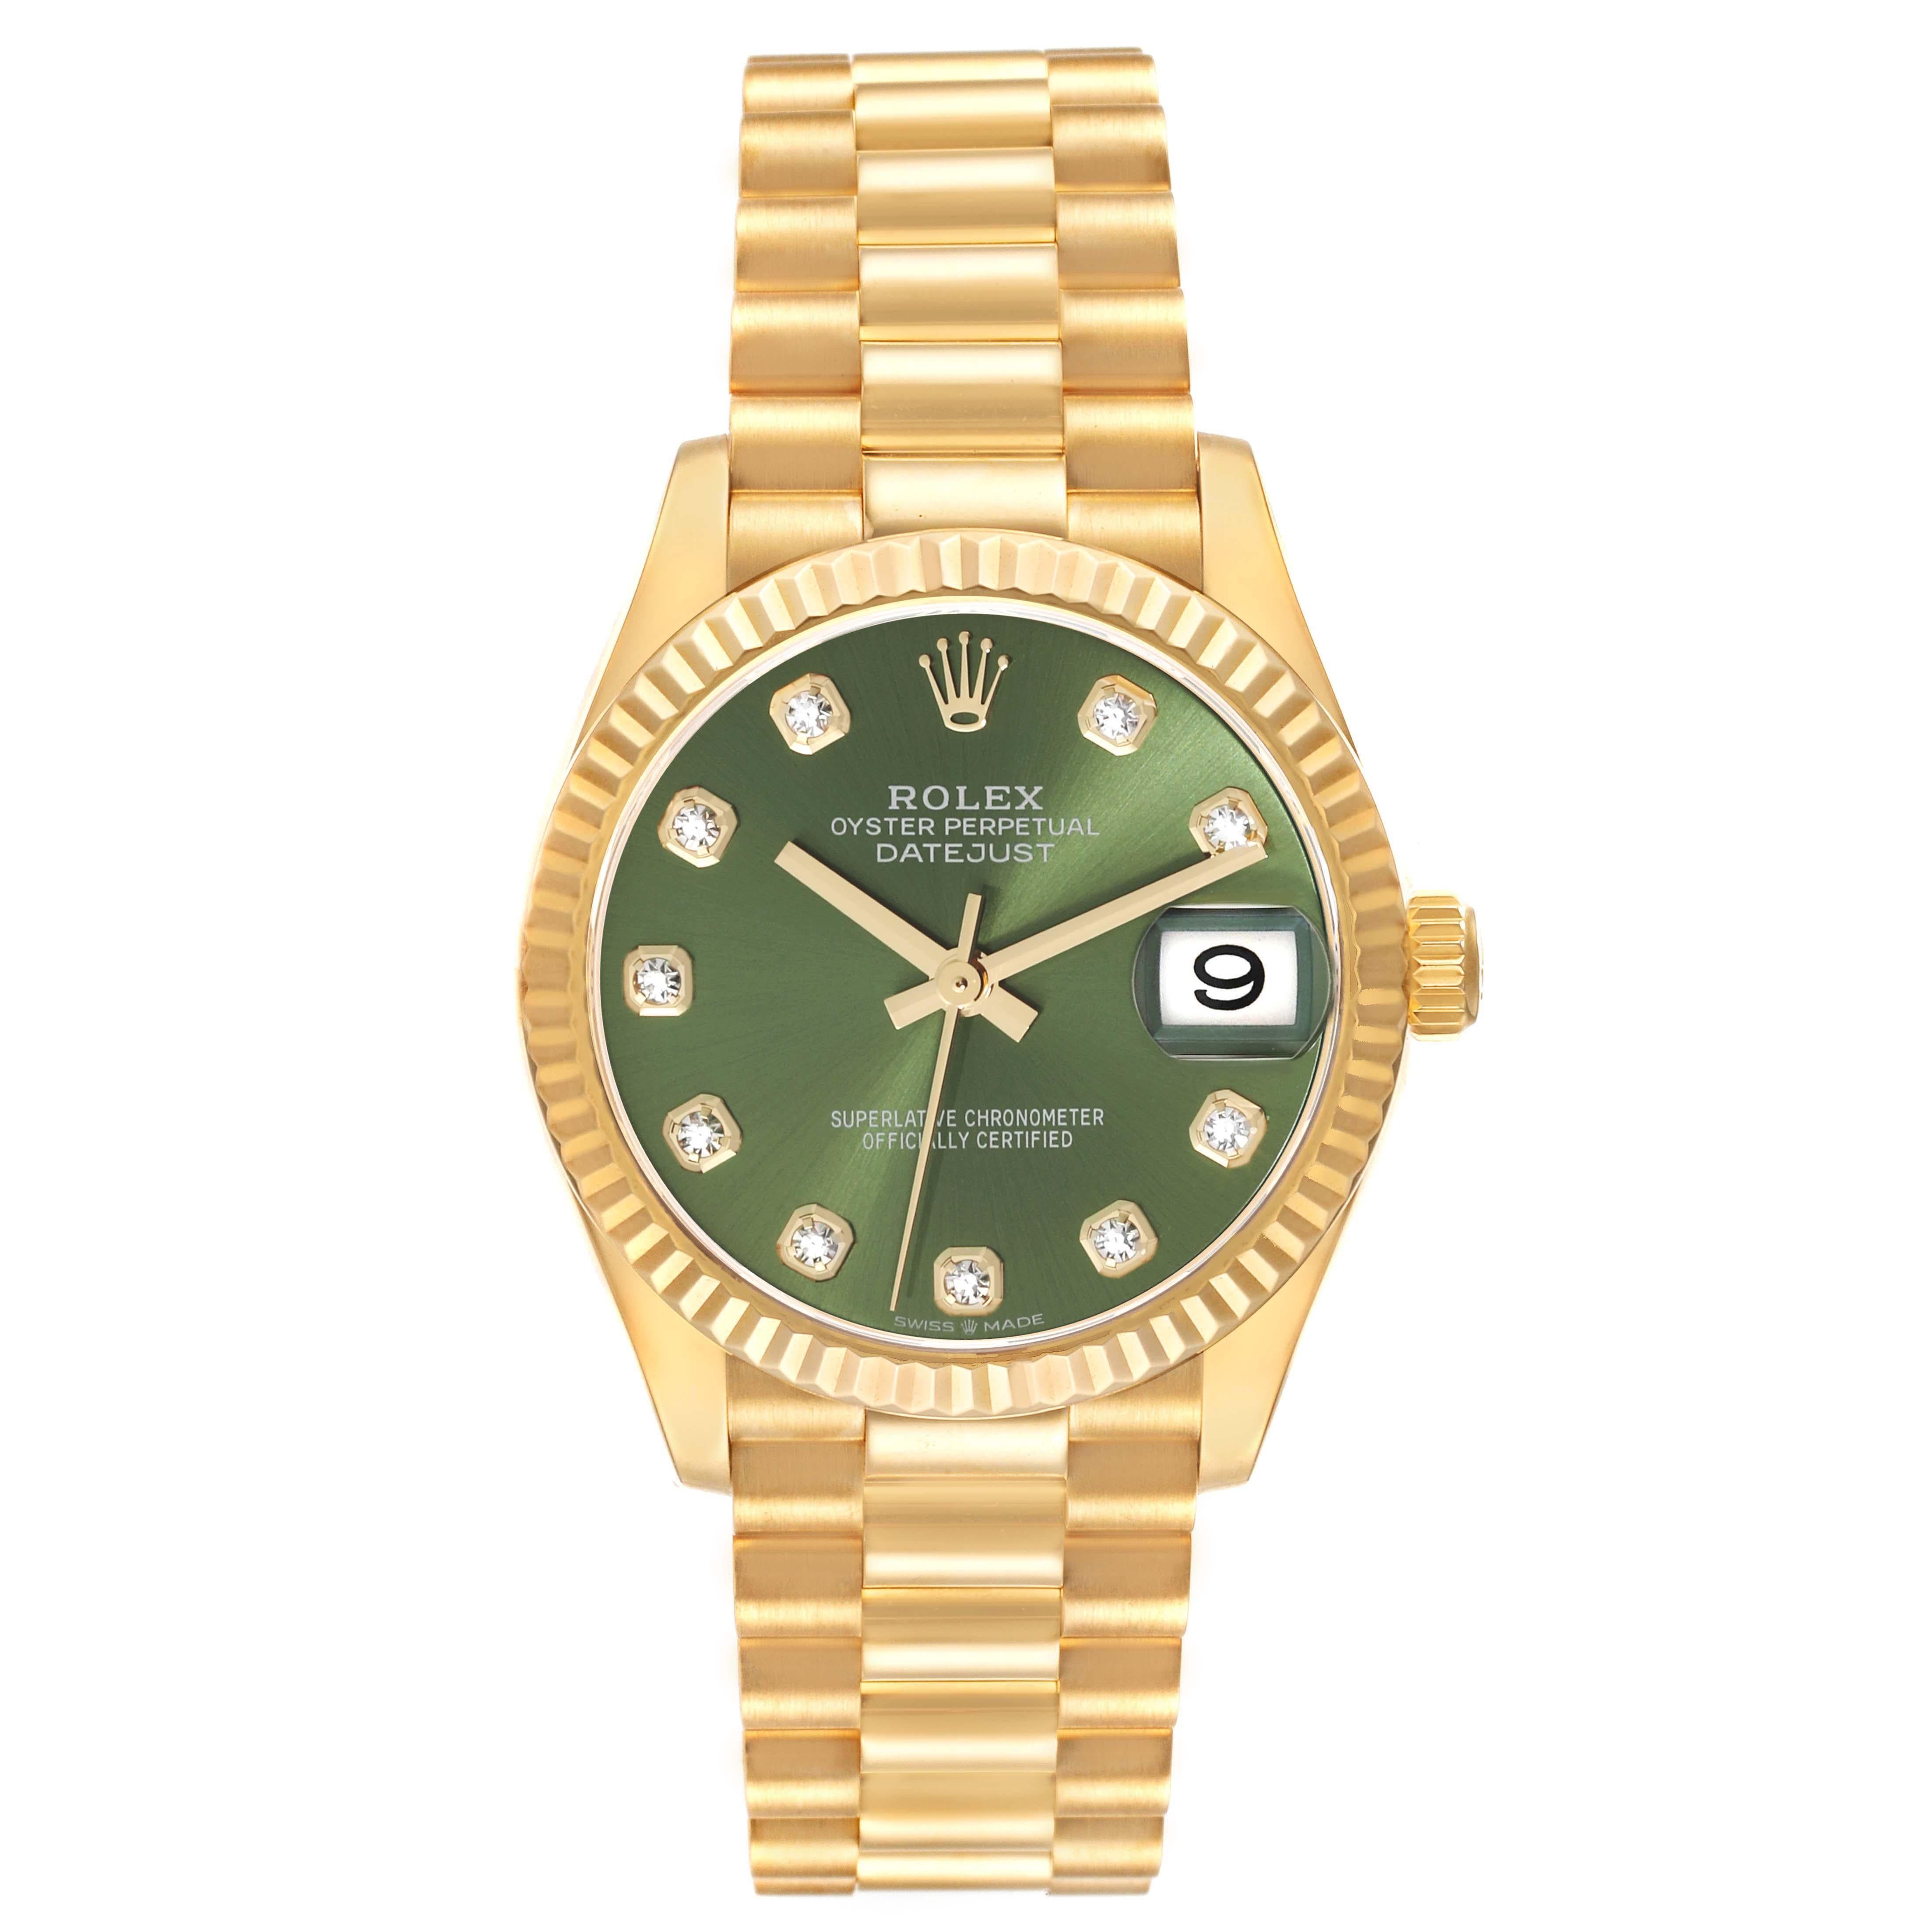 Rolex President Midsize Yellow Gold Diamond Ladies Watch 278278 Box Card. Officially certified chronometer self-winding movement. 18k yellow gold oyster case 31.0 mm in diameter. Rolex logo on a crown. 18k yellow gold fluted bezel. Scratch resistant